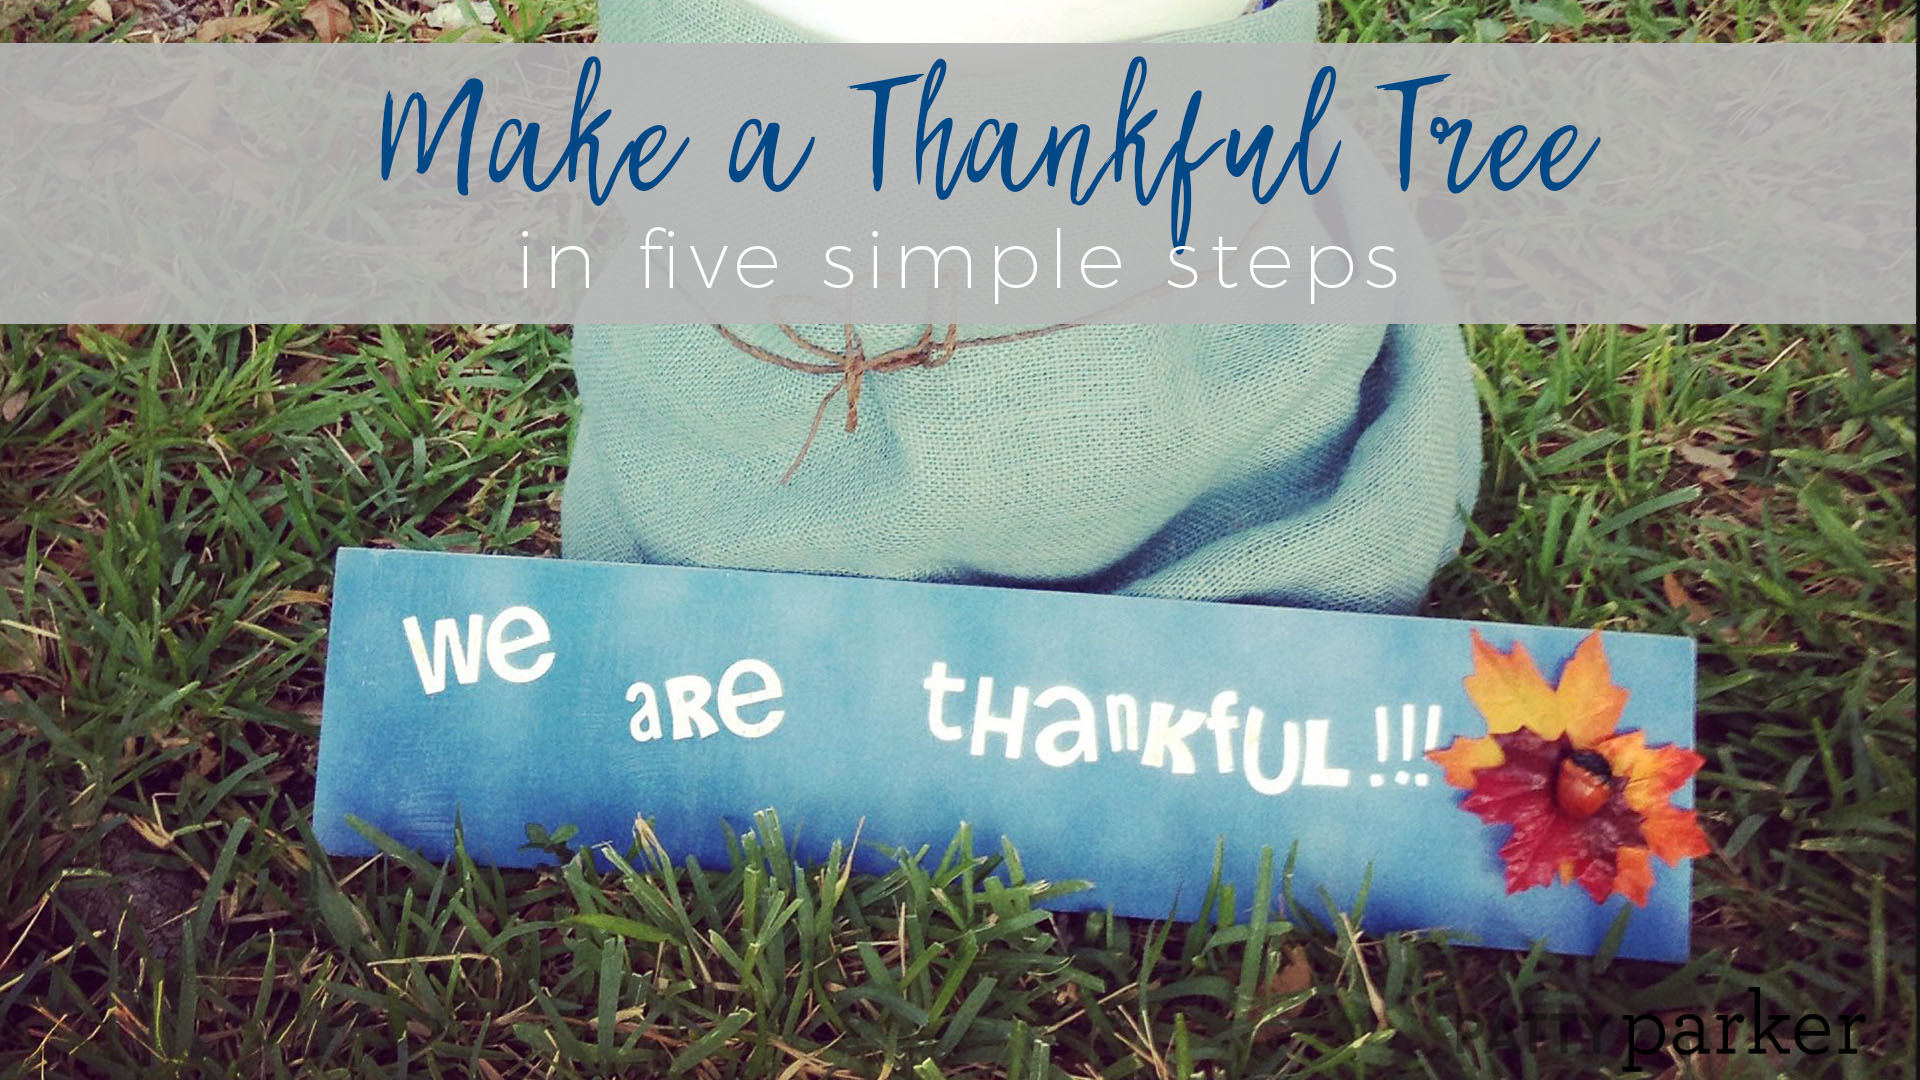 Bring your neighborhood together this fall with a thankful tree. Here are 5 simple steps to make this Thanksgiving memorable.